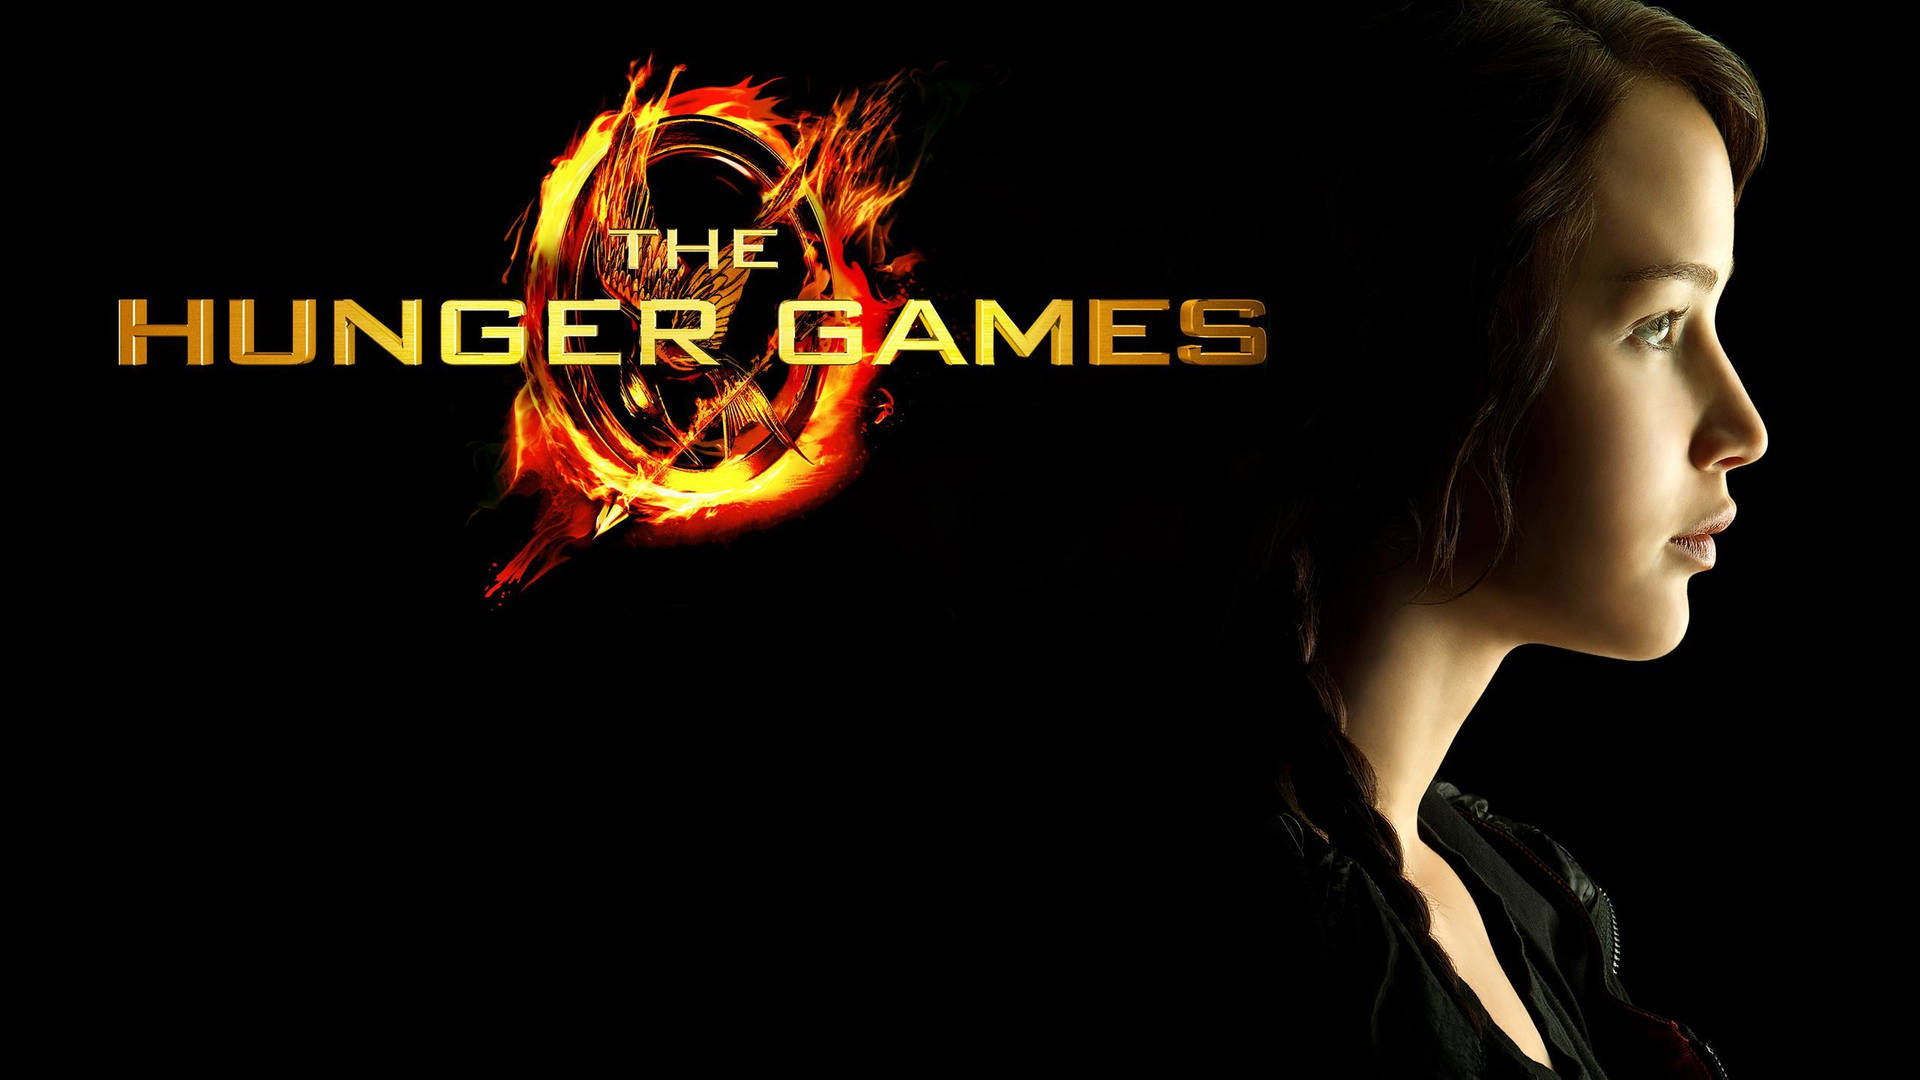 The Hunger Games Film Series Background